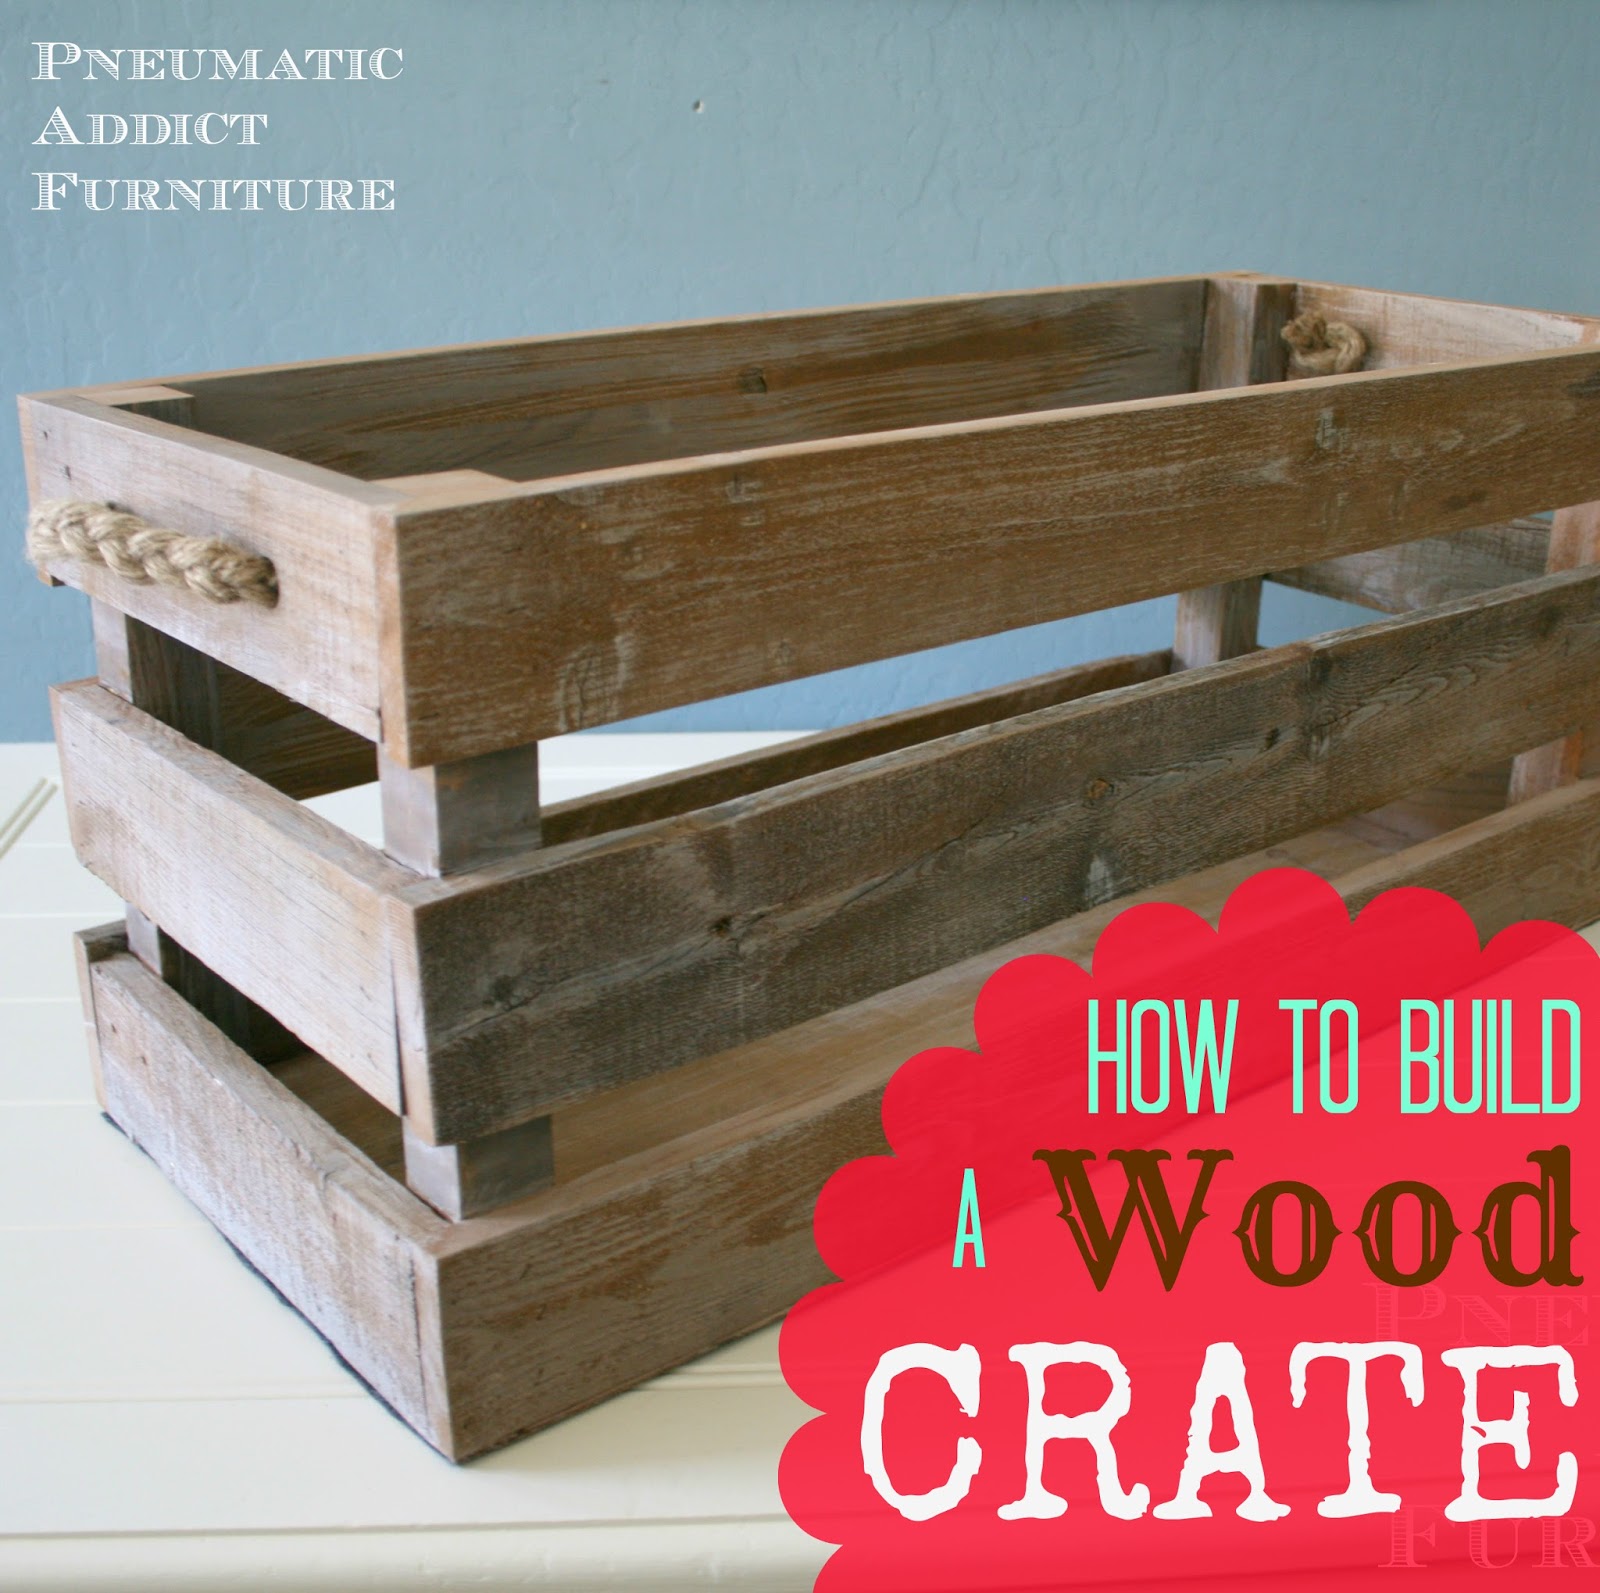 Pneumatic Addict : How to Build a Wood Crate